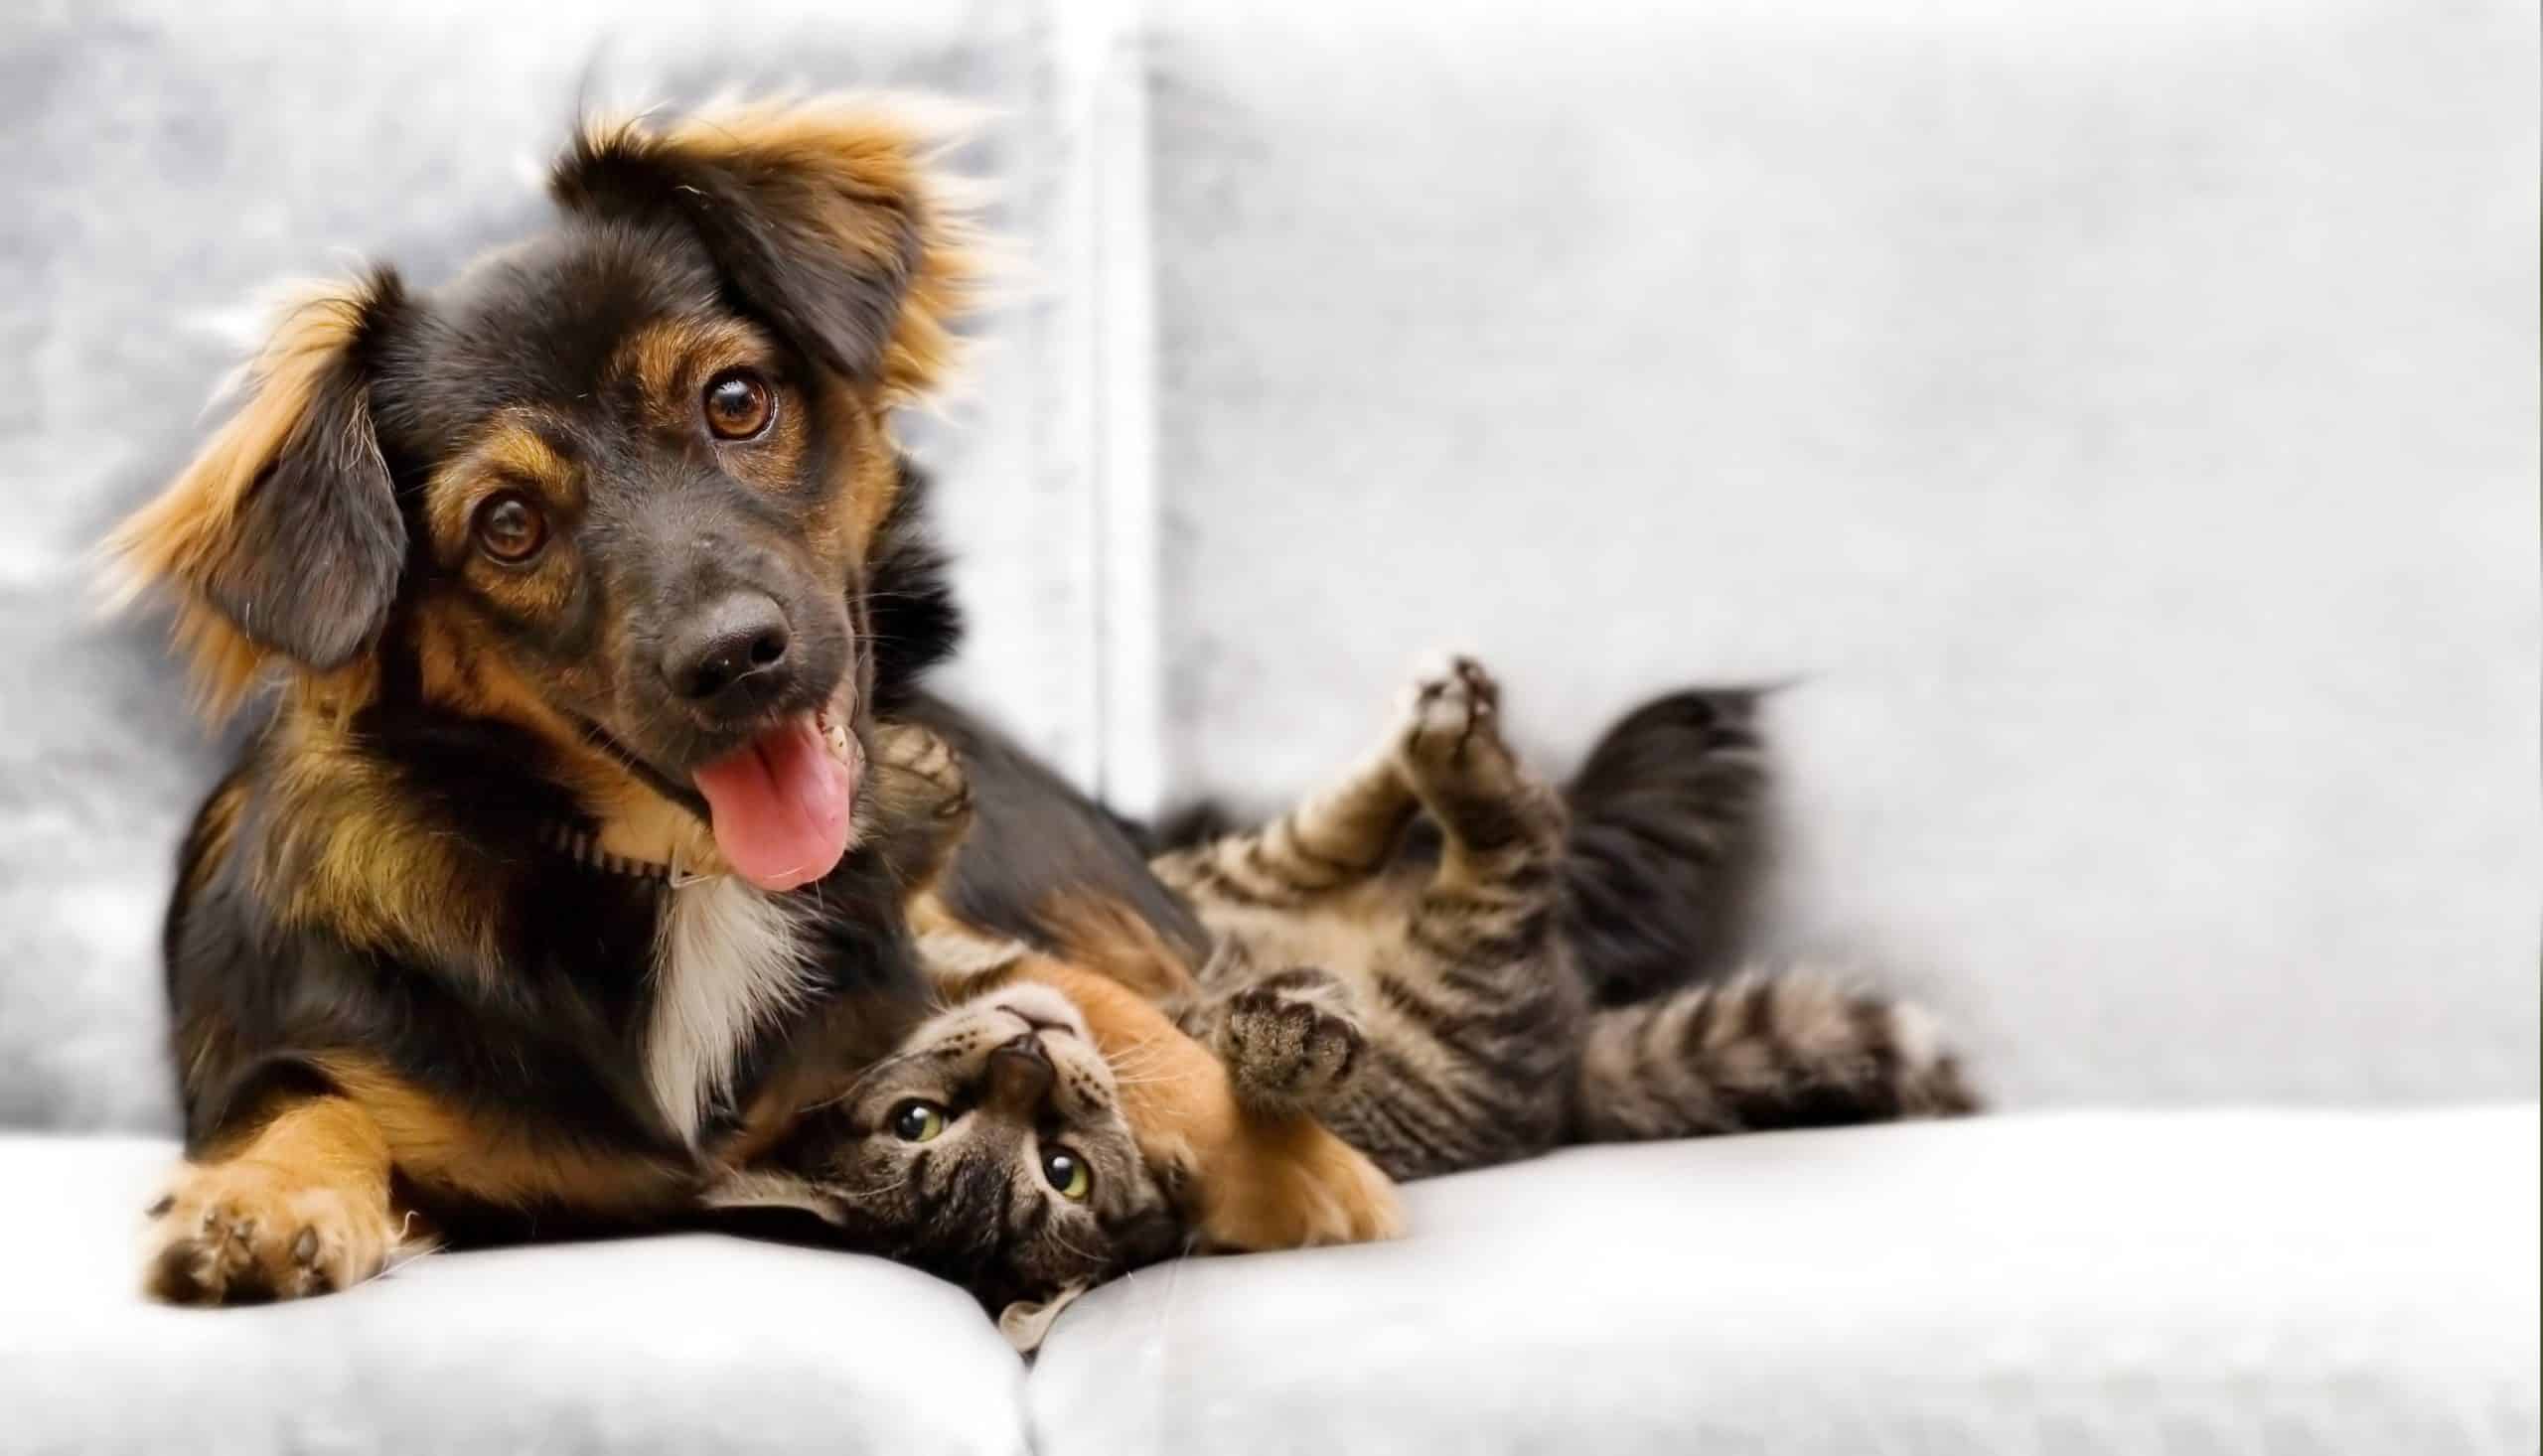 Mixed breed dog plays with cat.